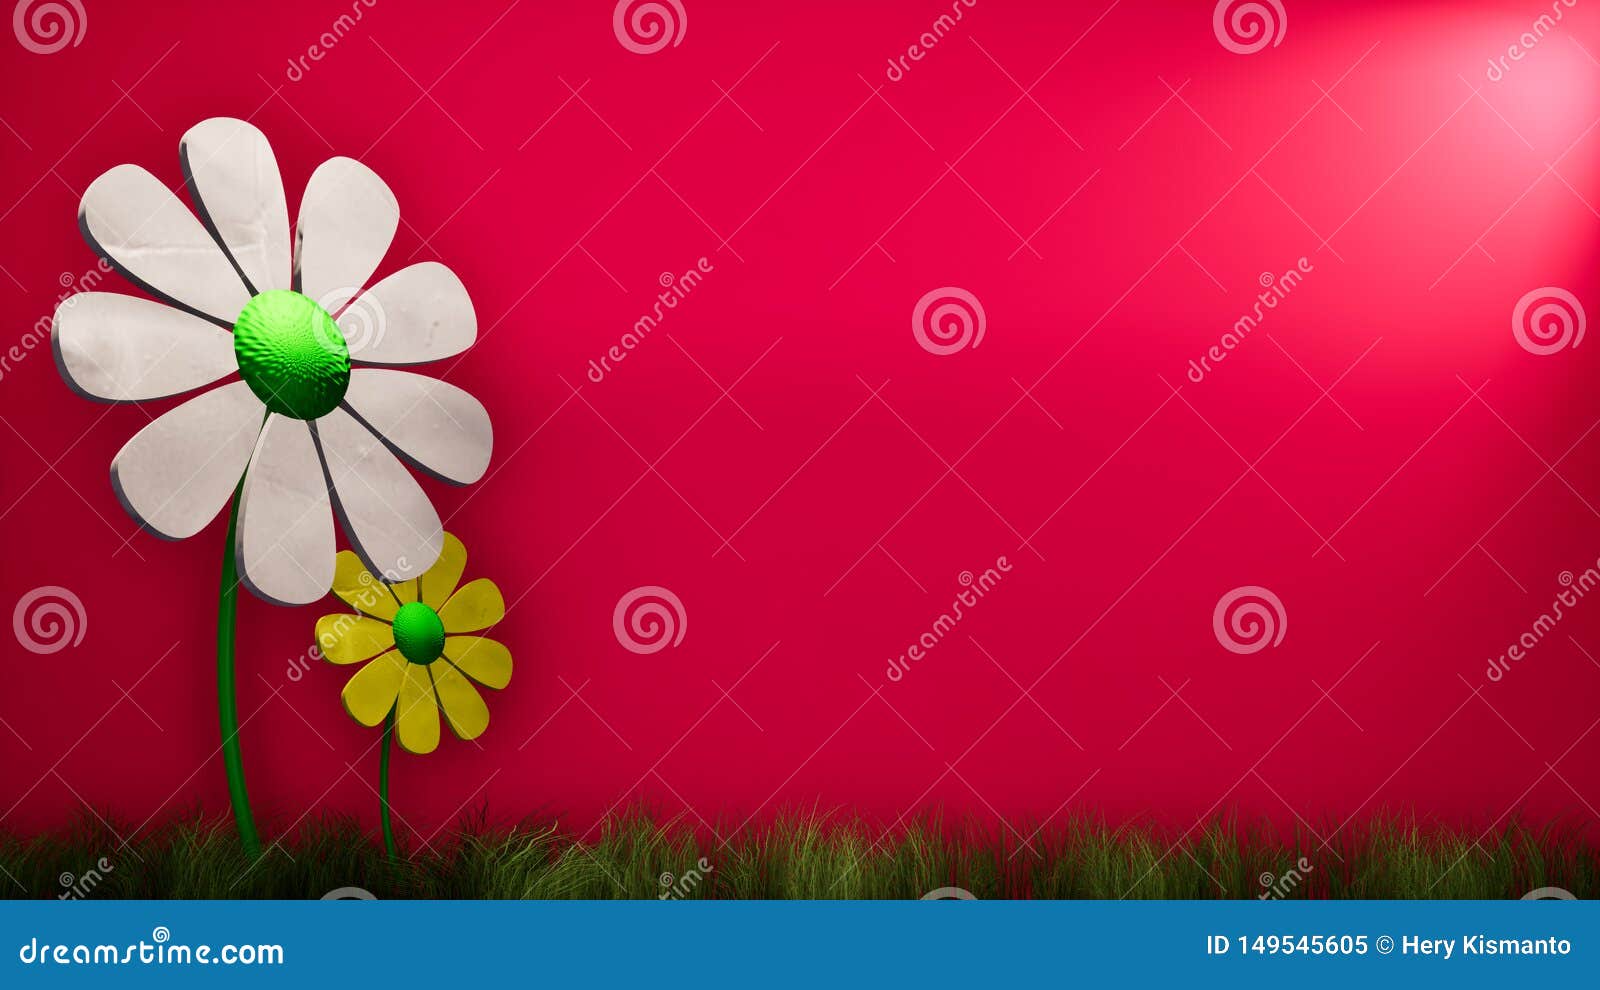 3d Abstract Flower Illustration Background Wallpaper Stock Illustration Illustration Of Image Shape 149545605